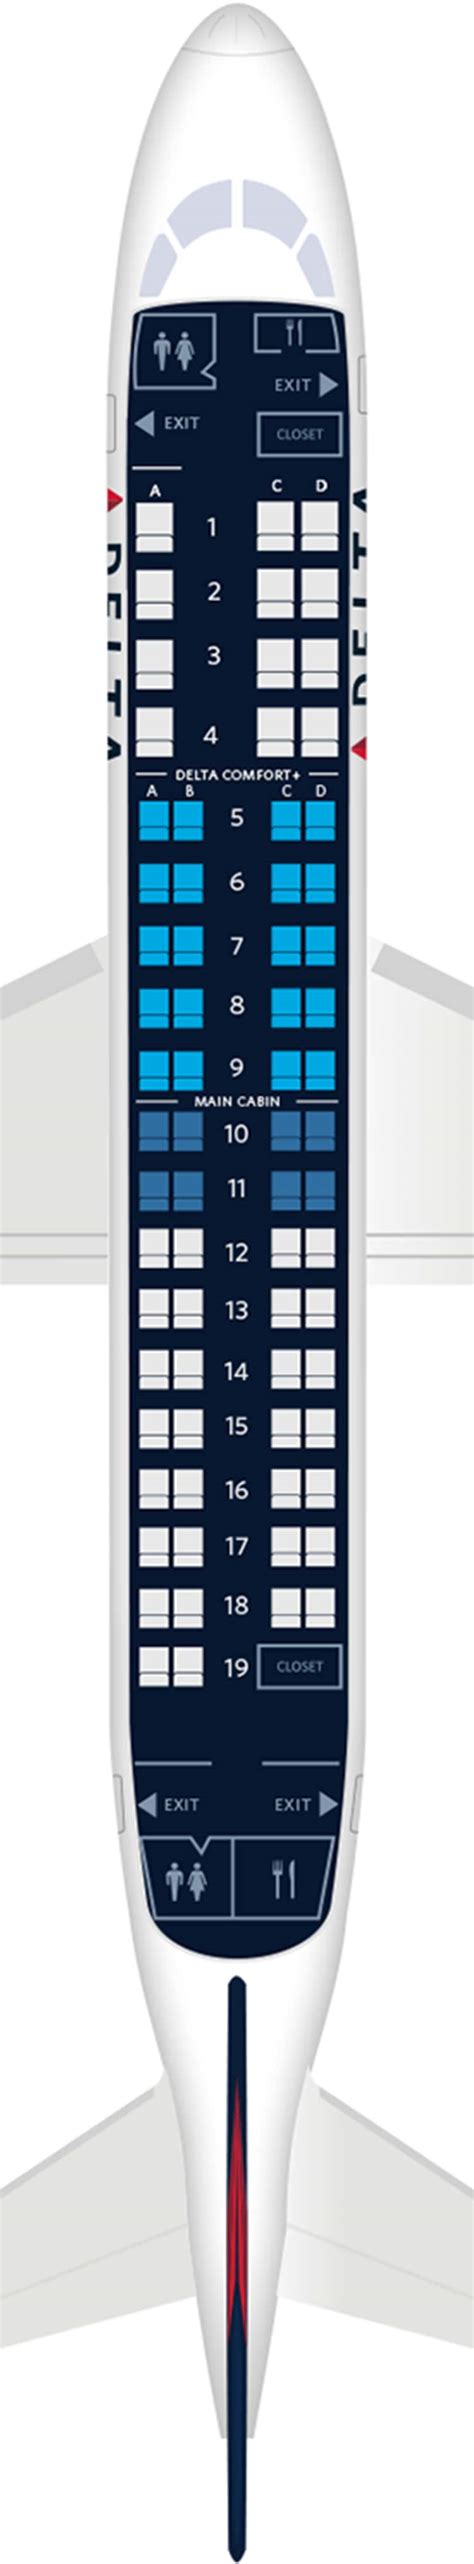 Embraer 175 seating chart. Flying in seat 17C on a American Airlines Embraer 175 soon? Read reviews of seat 17C and find a better seat with our American Airlines seating charts. seat nk beta. seat nk beta. airlines. Browse All. A. ... American Airlines Embraer 175 Seat Reviews Show seat chart . Pro tips: this is an average first class seat: Add a Tip. View seat details . 